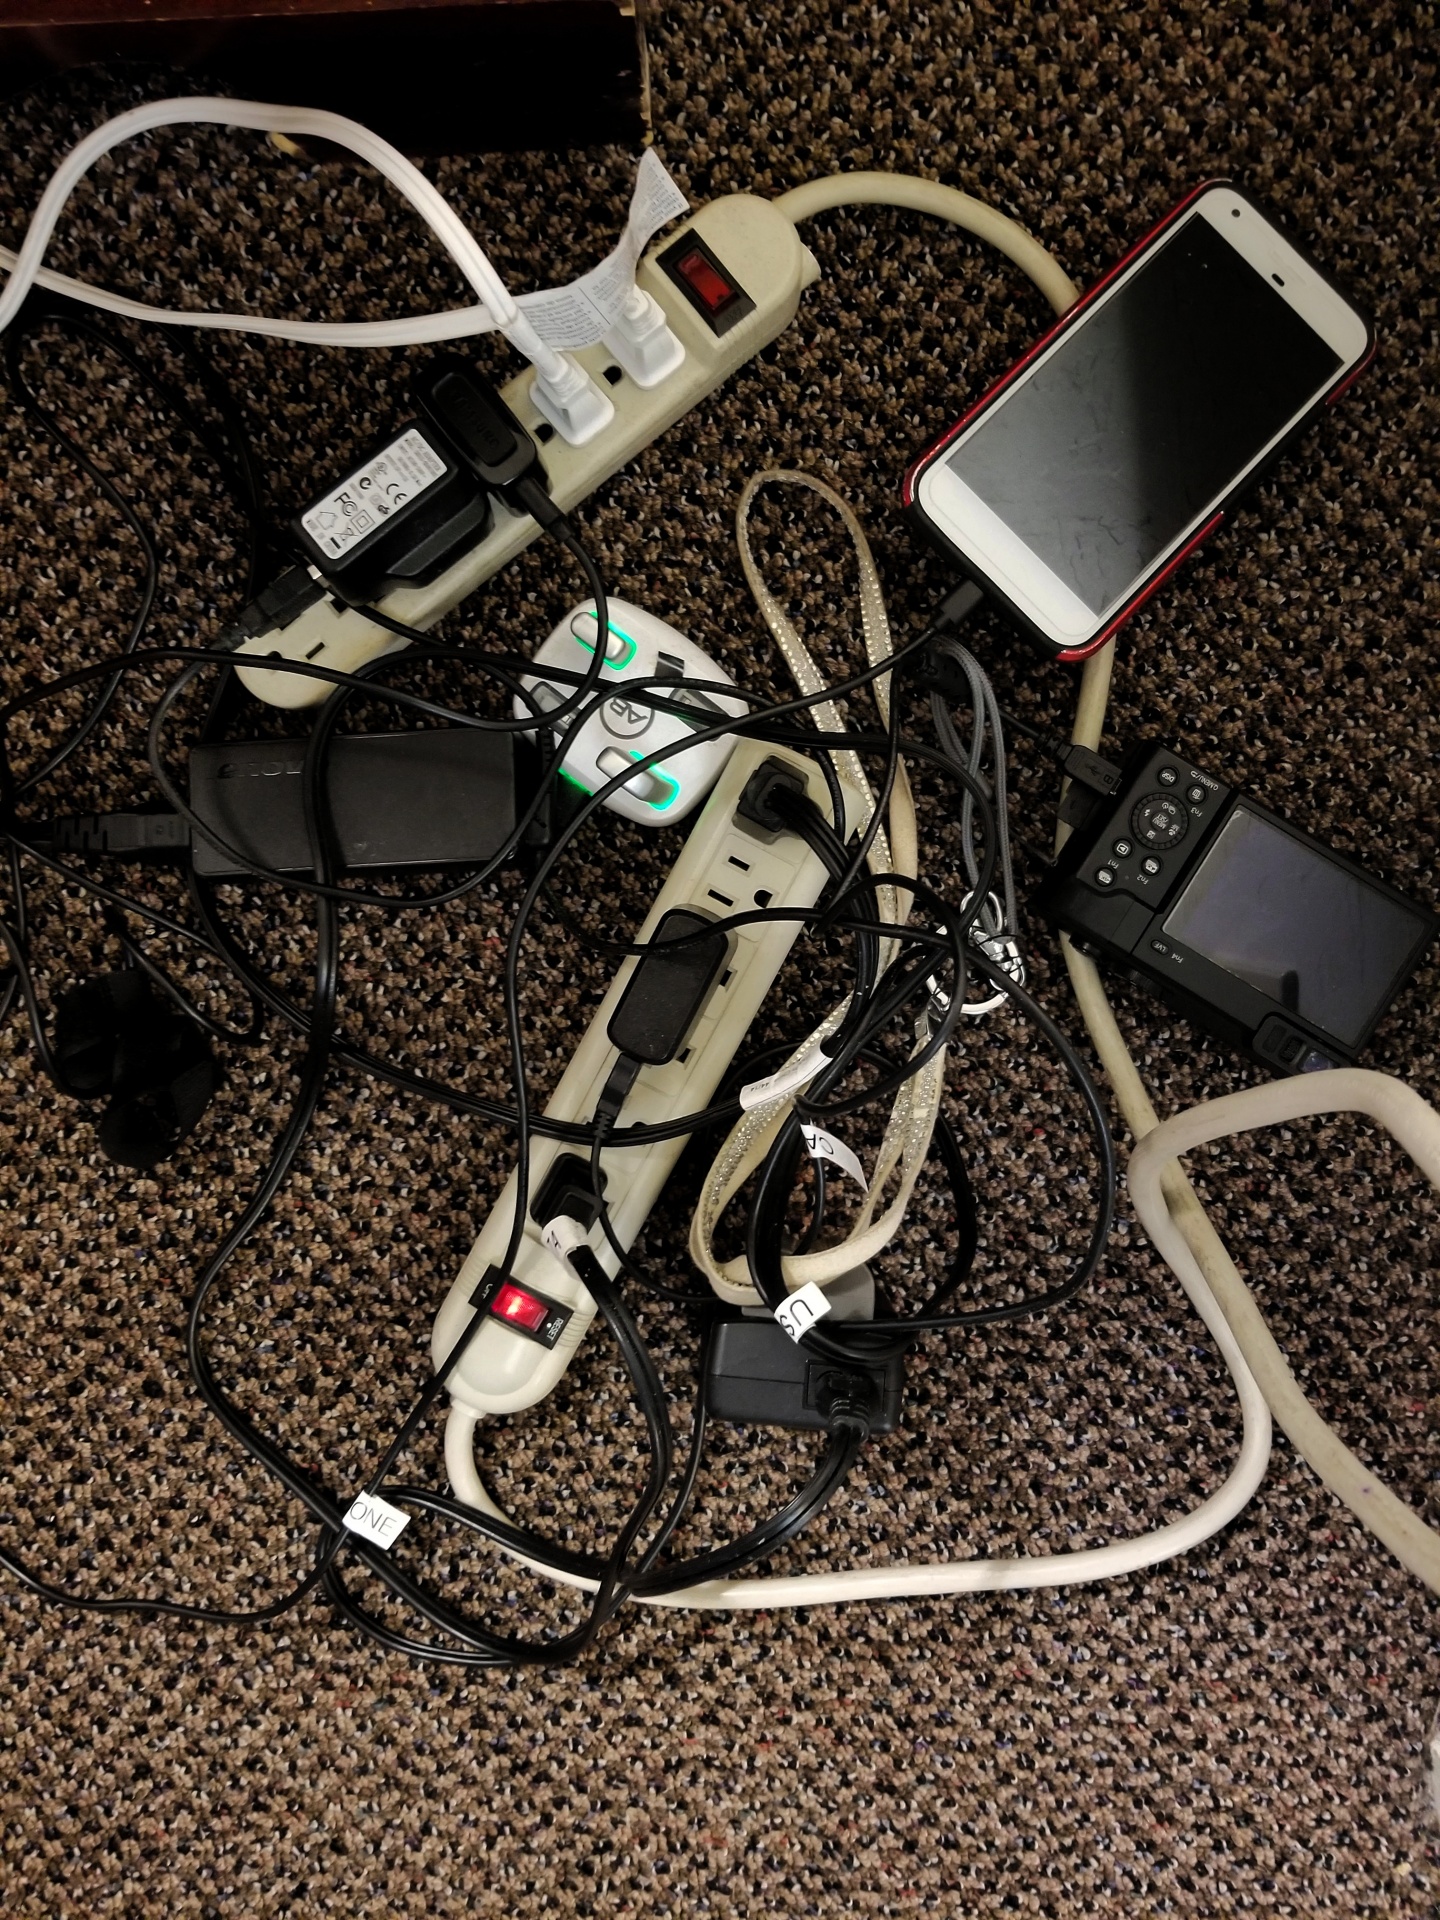 Looking down on the multiple electronic items plugged in for charging